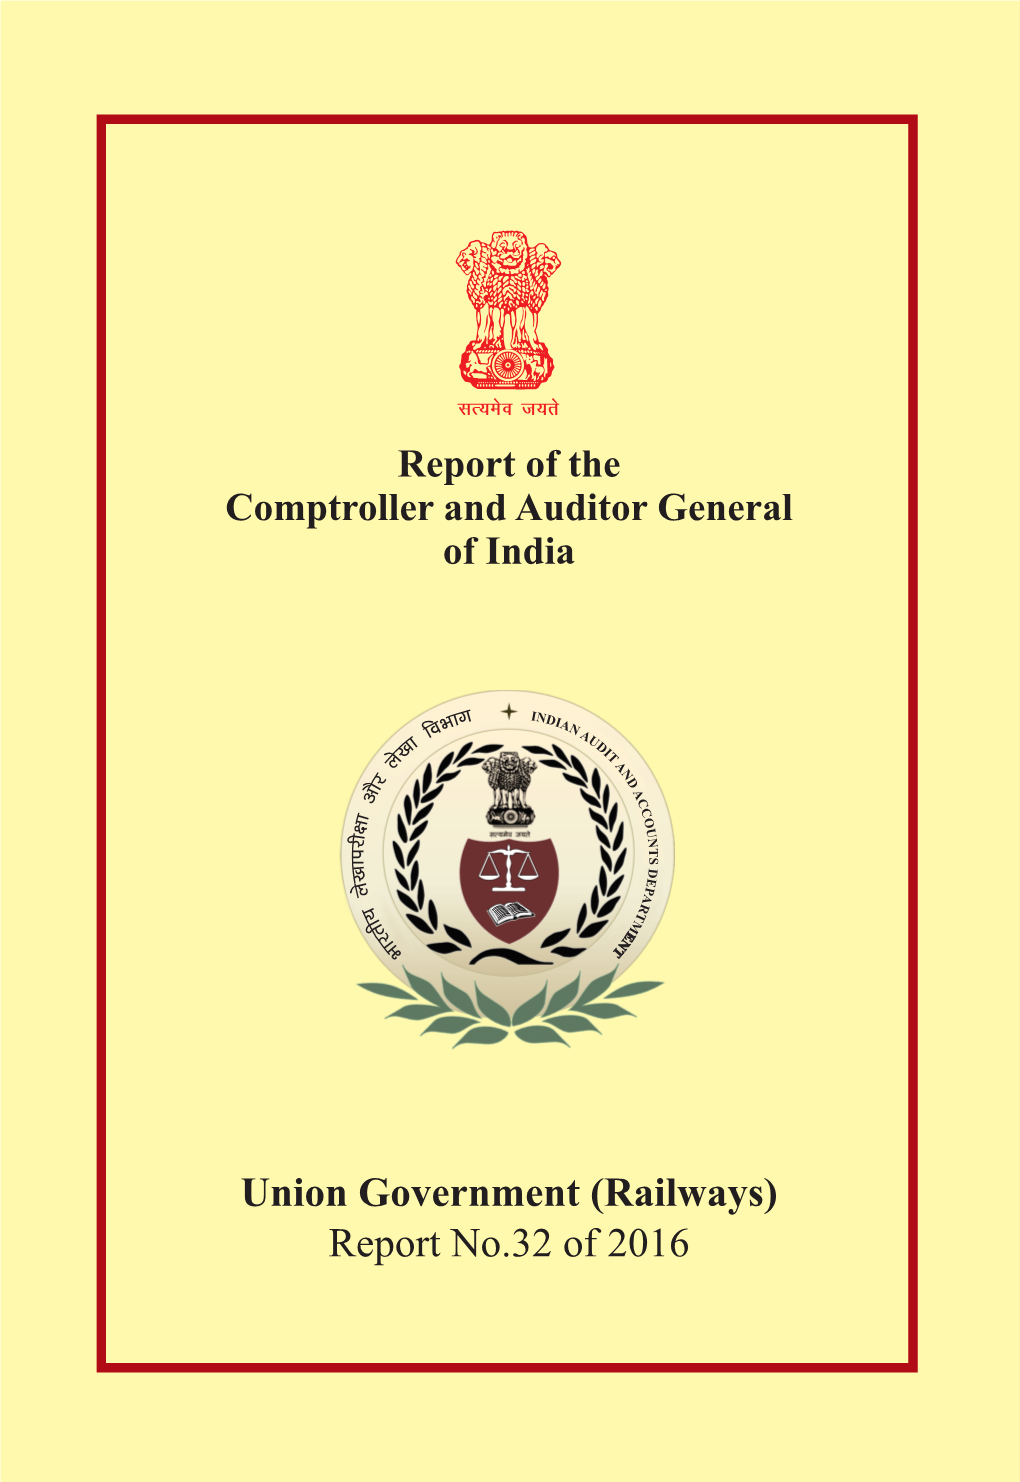 Integrated Coaching Management System in Indian Railways